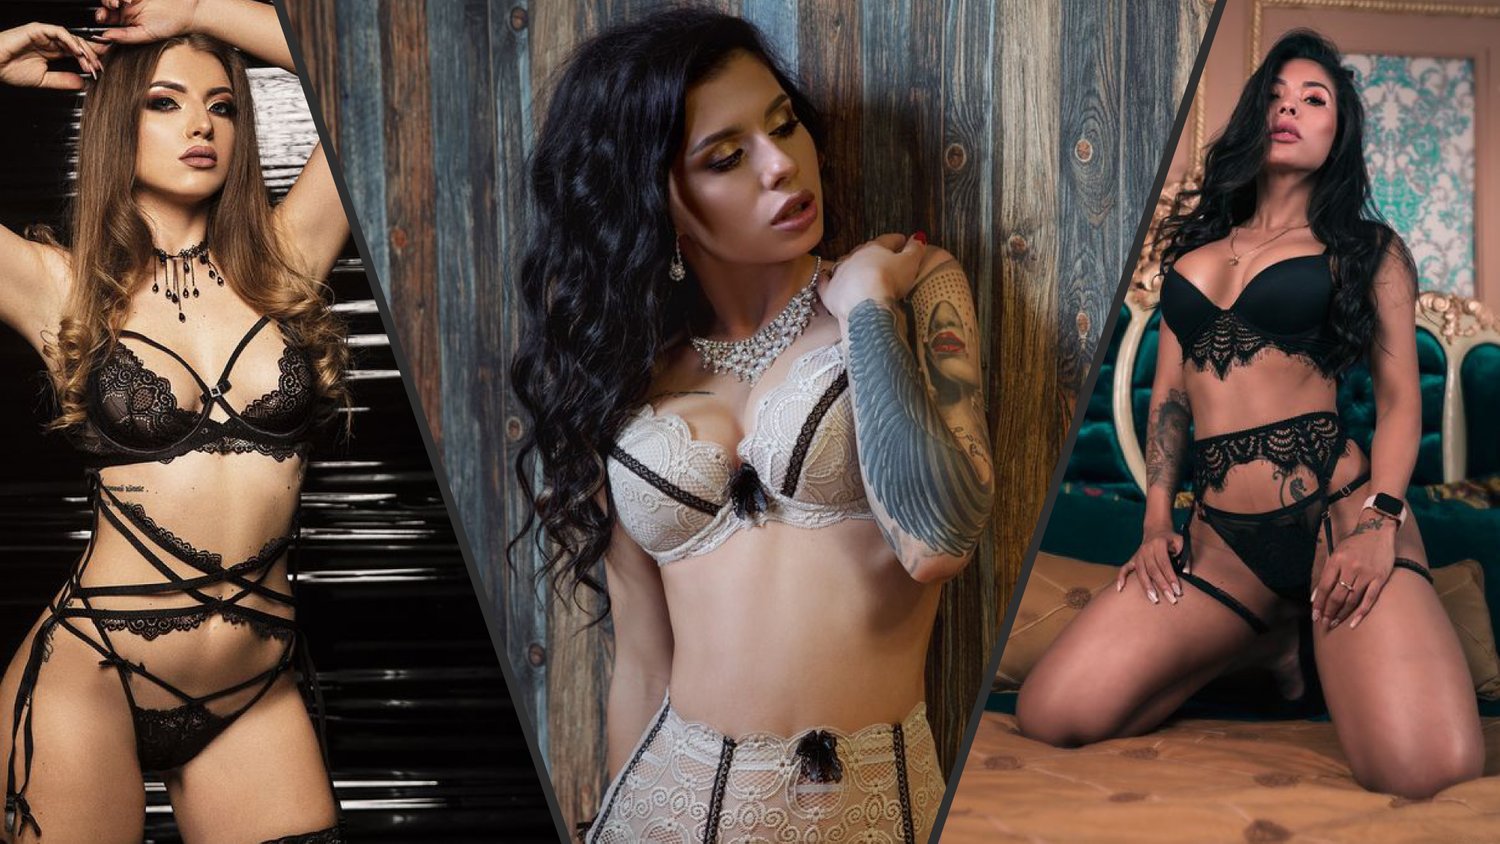 Composition of sexy camgirls wearing lingerie in erotic poses